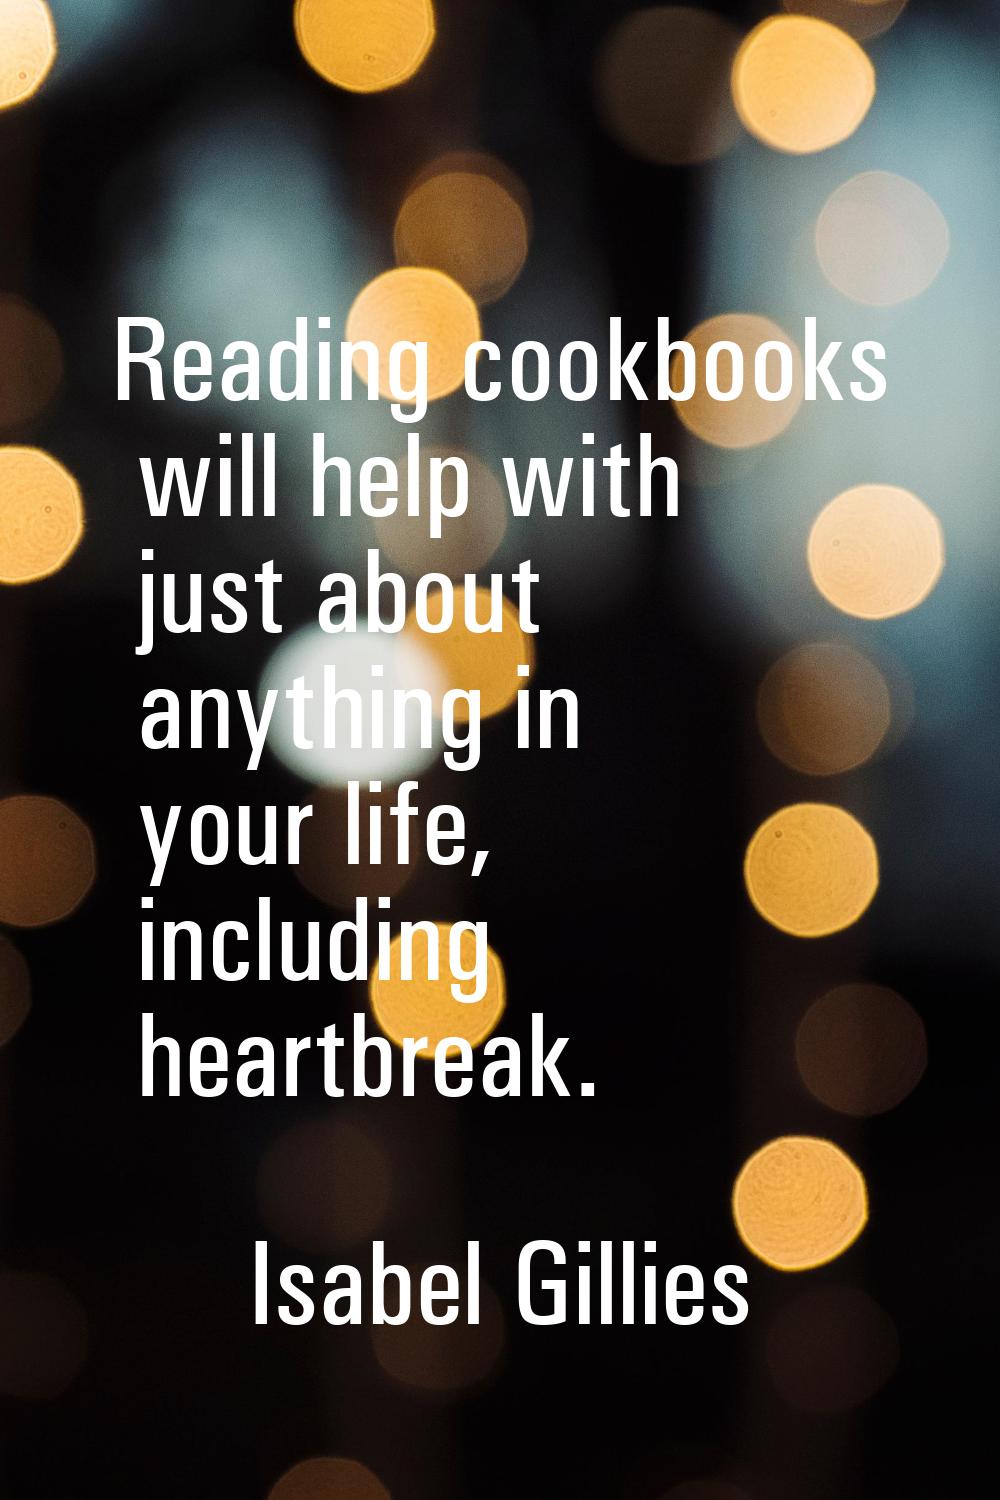 Reading cookbooks will help with just about anything in your life, including heartbreak.